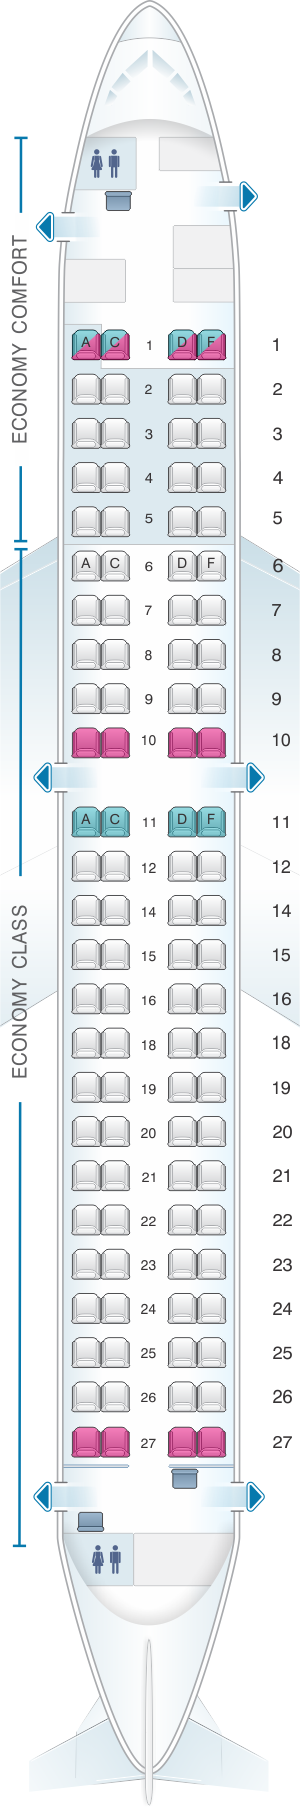 E90 Airlines Seating Chart